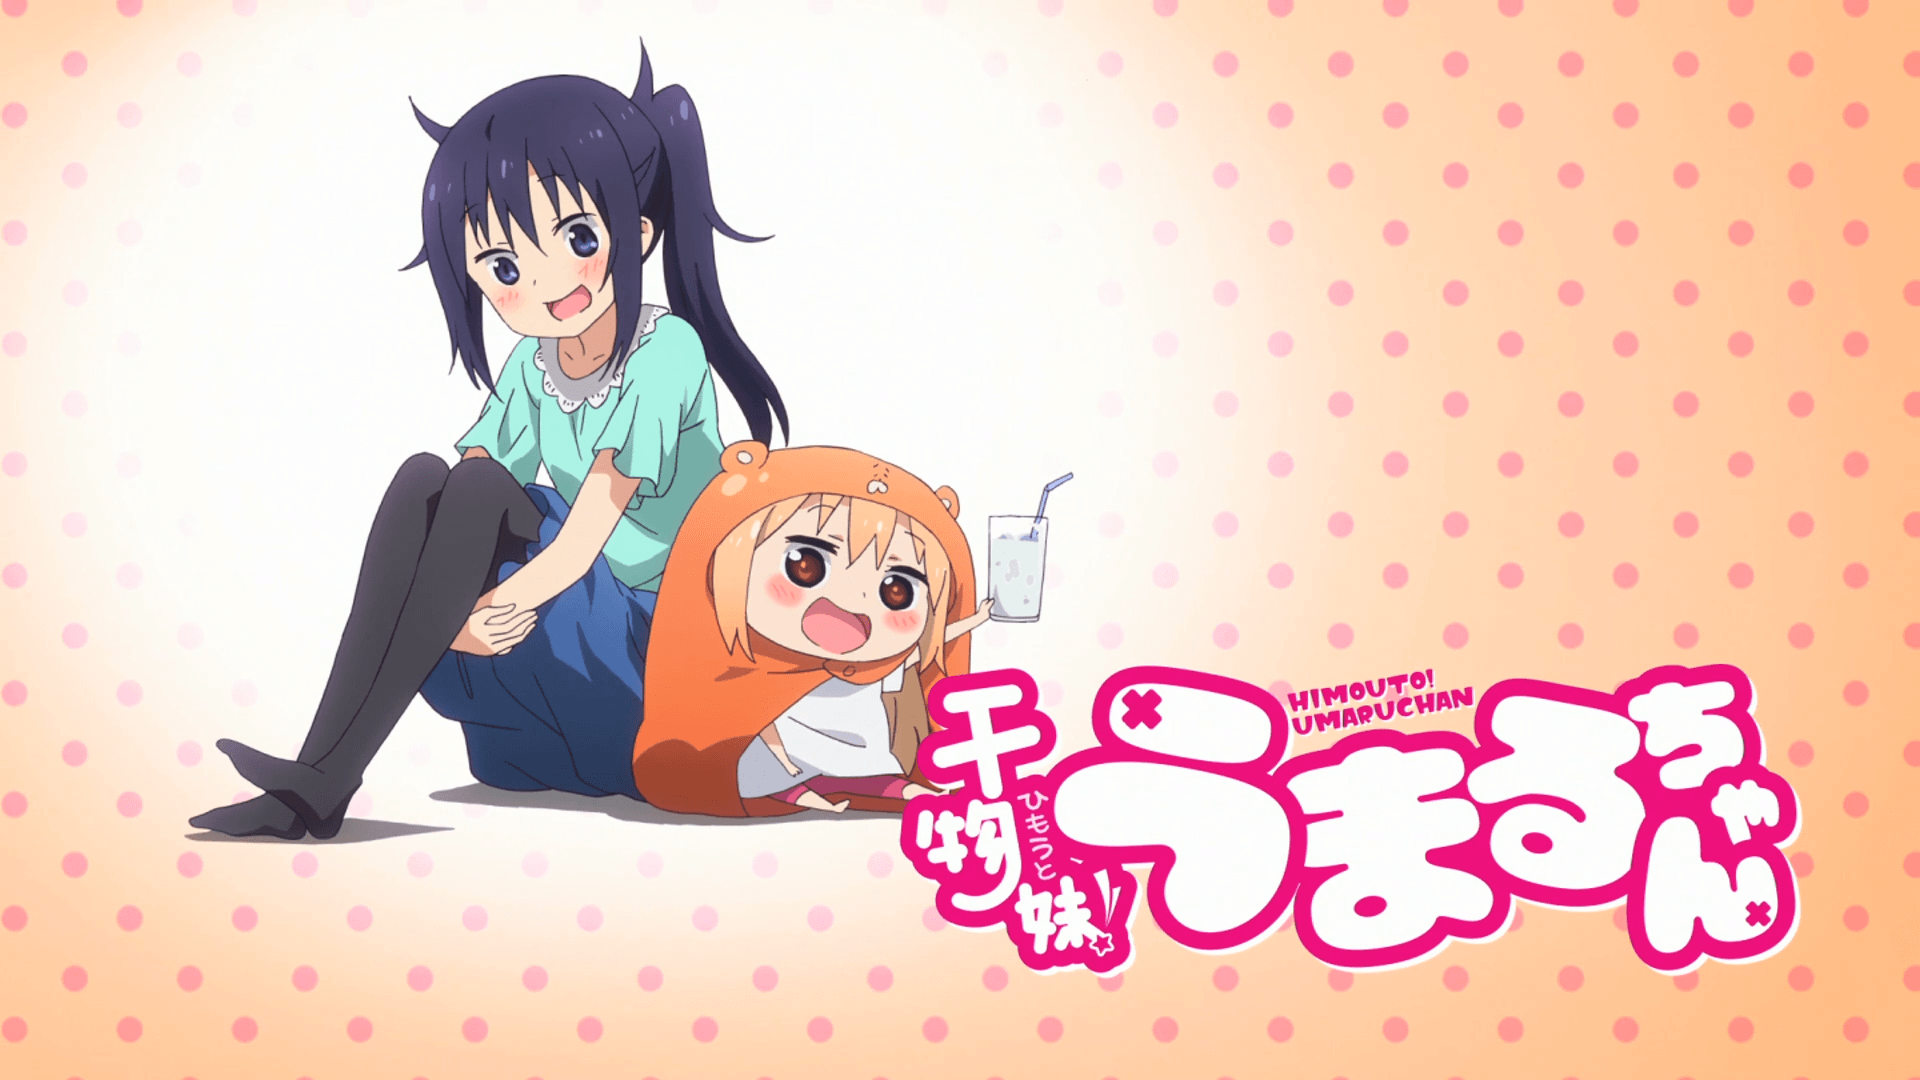 Spoilers] Himouto! Umaru Chan 5 [Discussion]